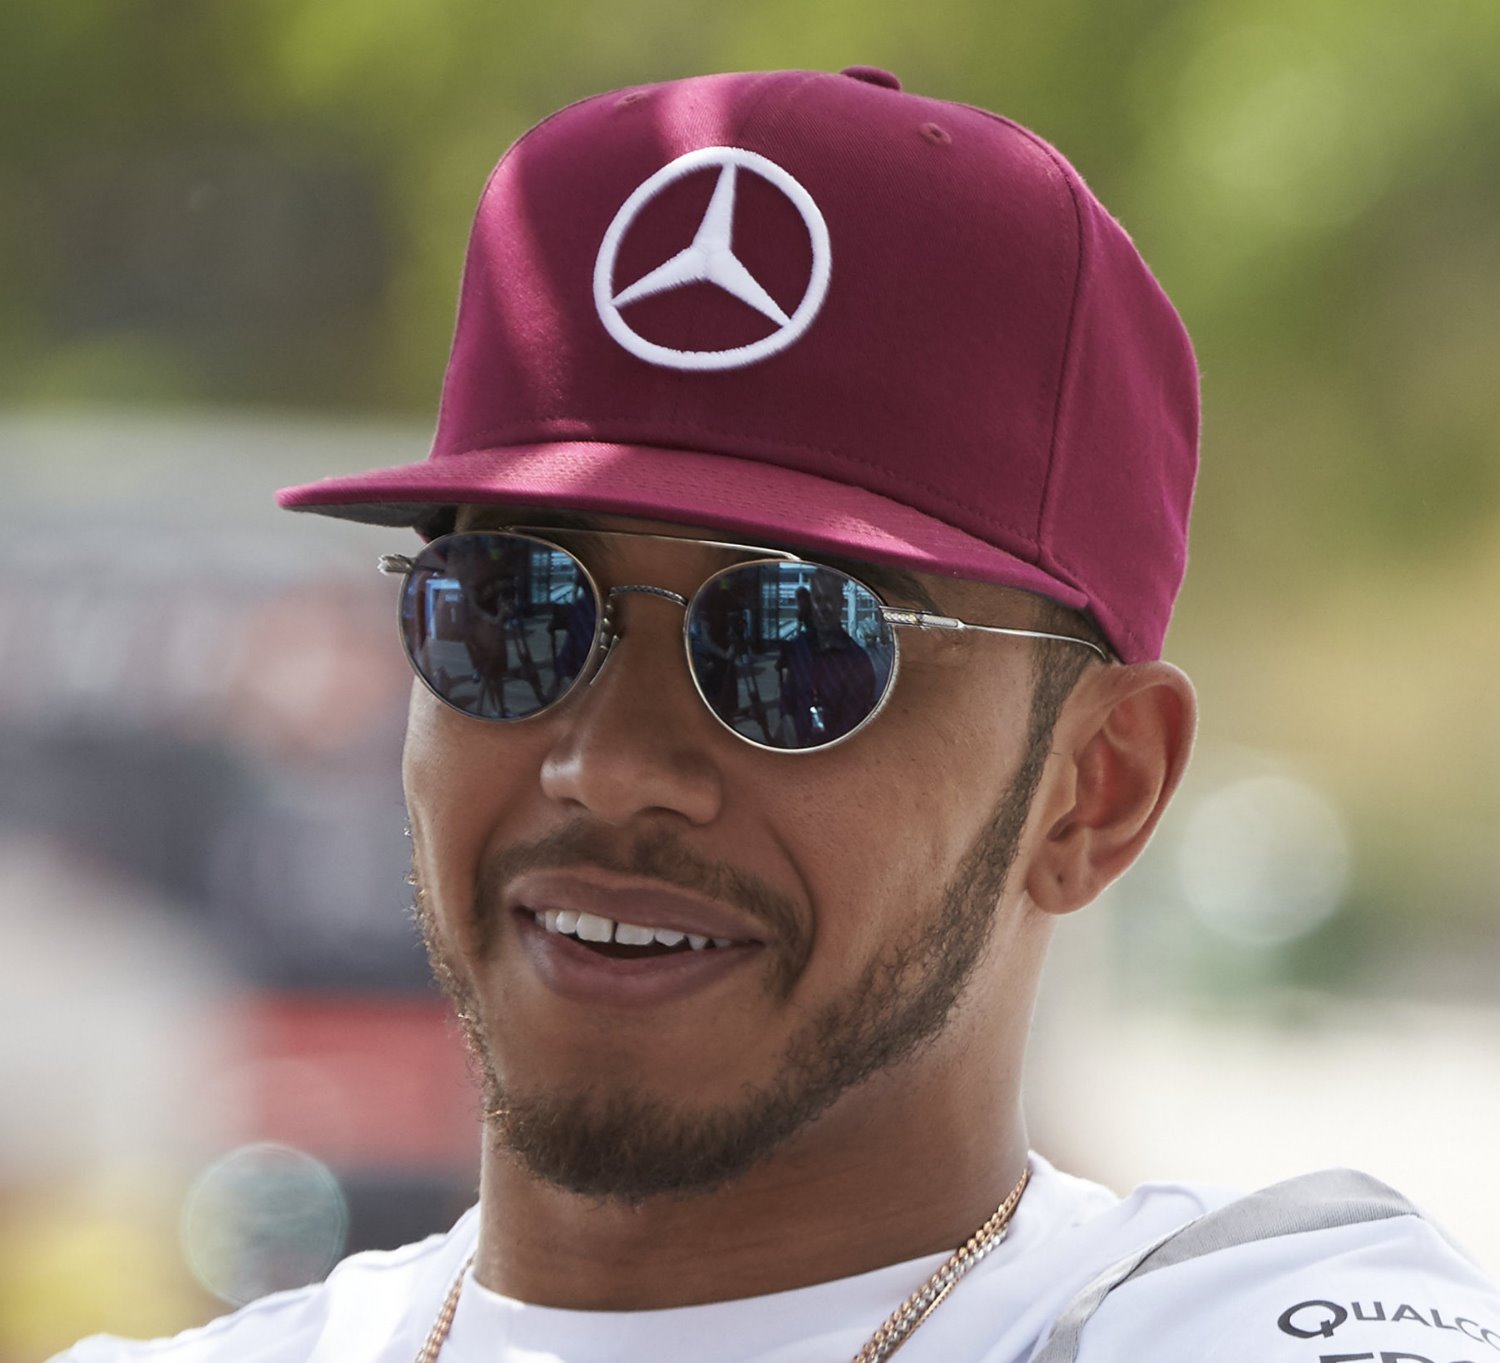 Hamilton confident he can defeat Ferrari. He said there is more time in the car. Mercedes may have dialed back his power to make it look close on Saturday